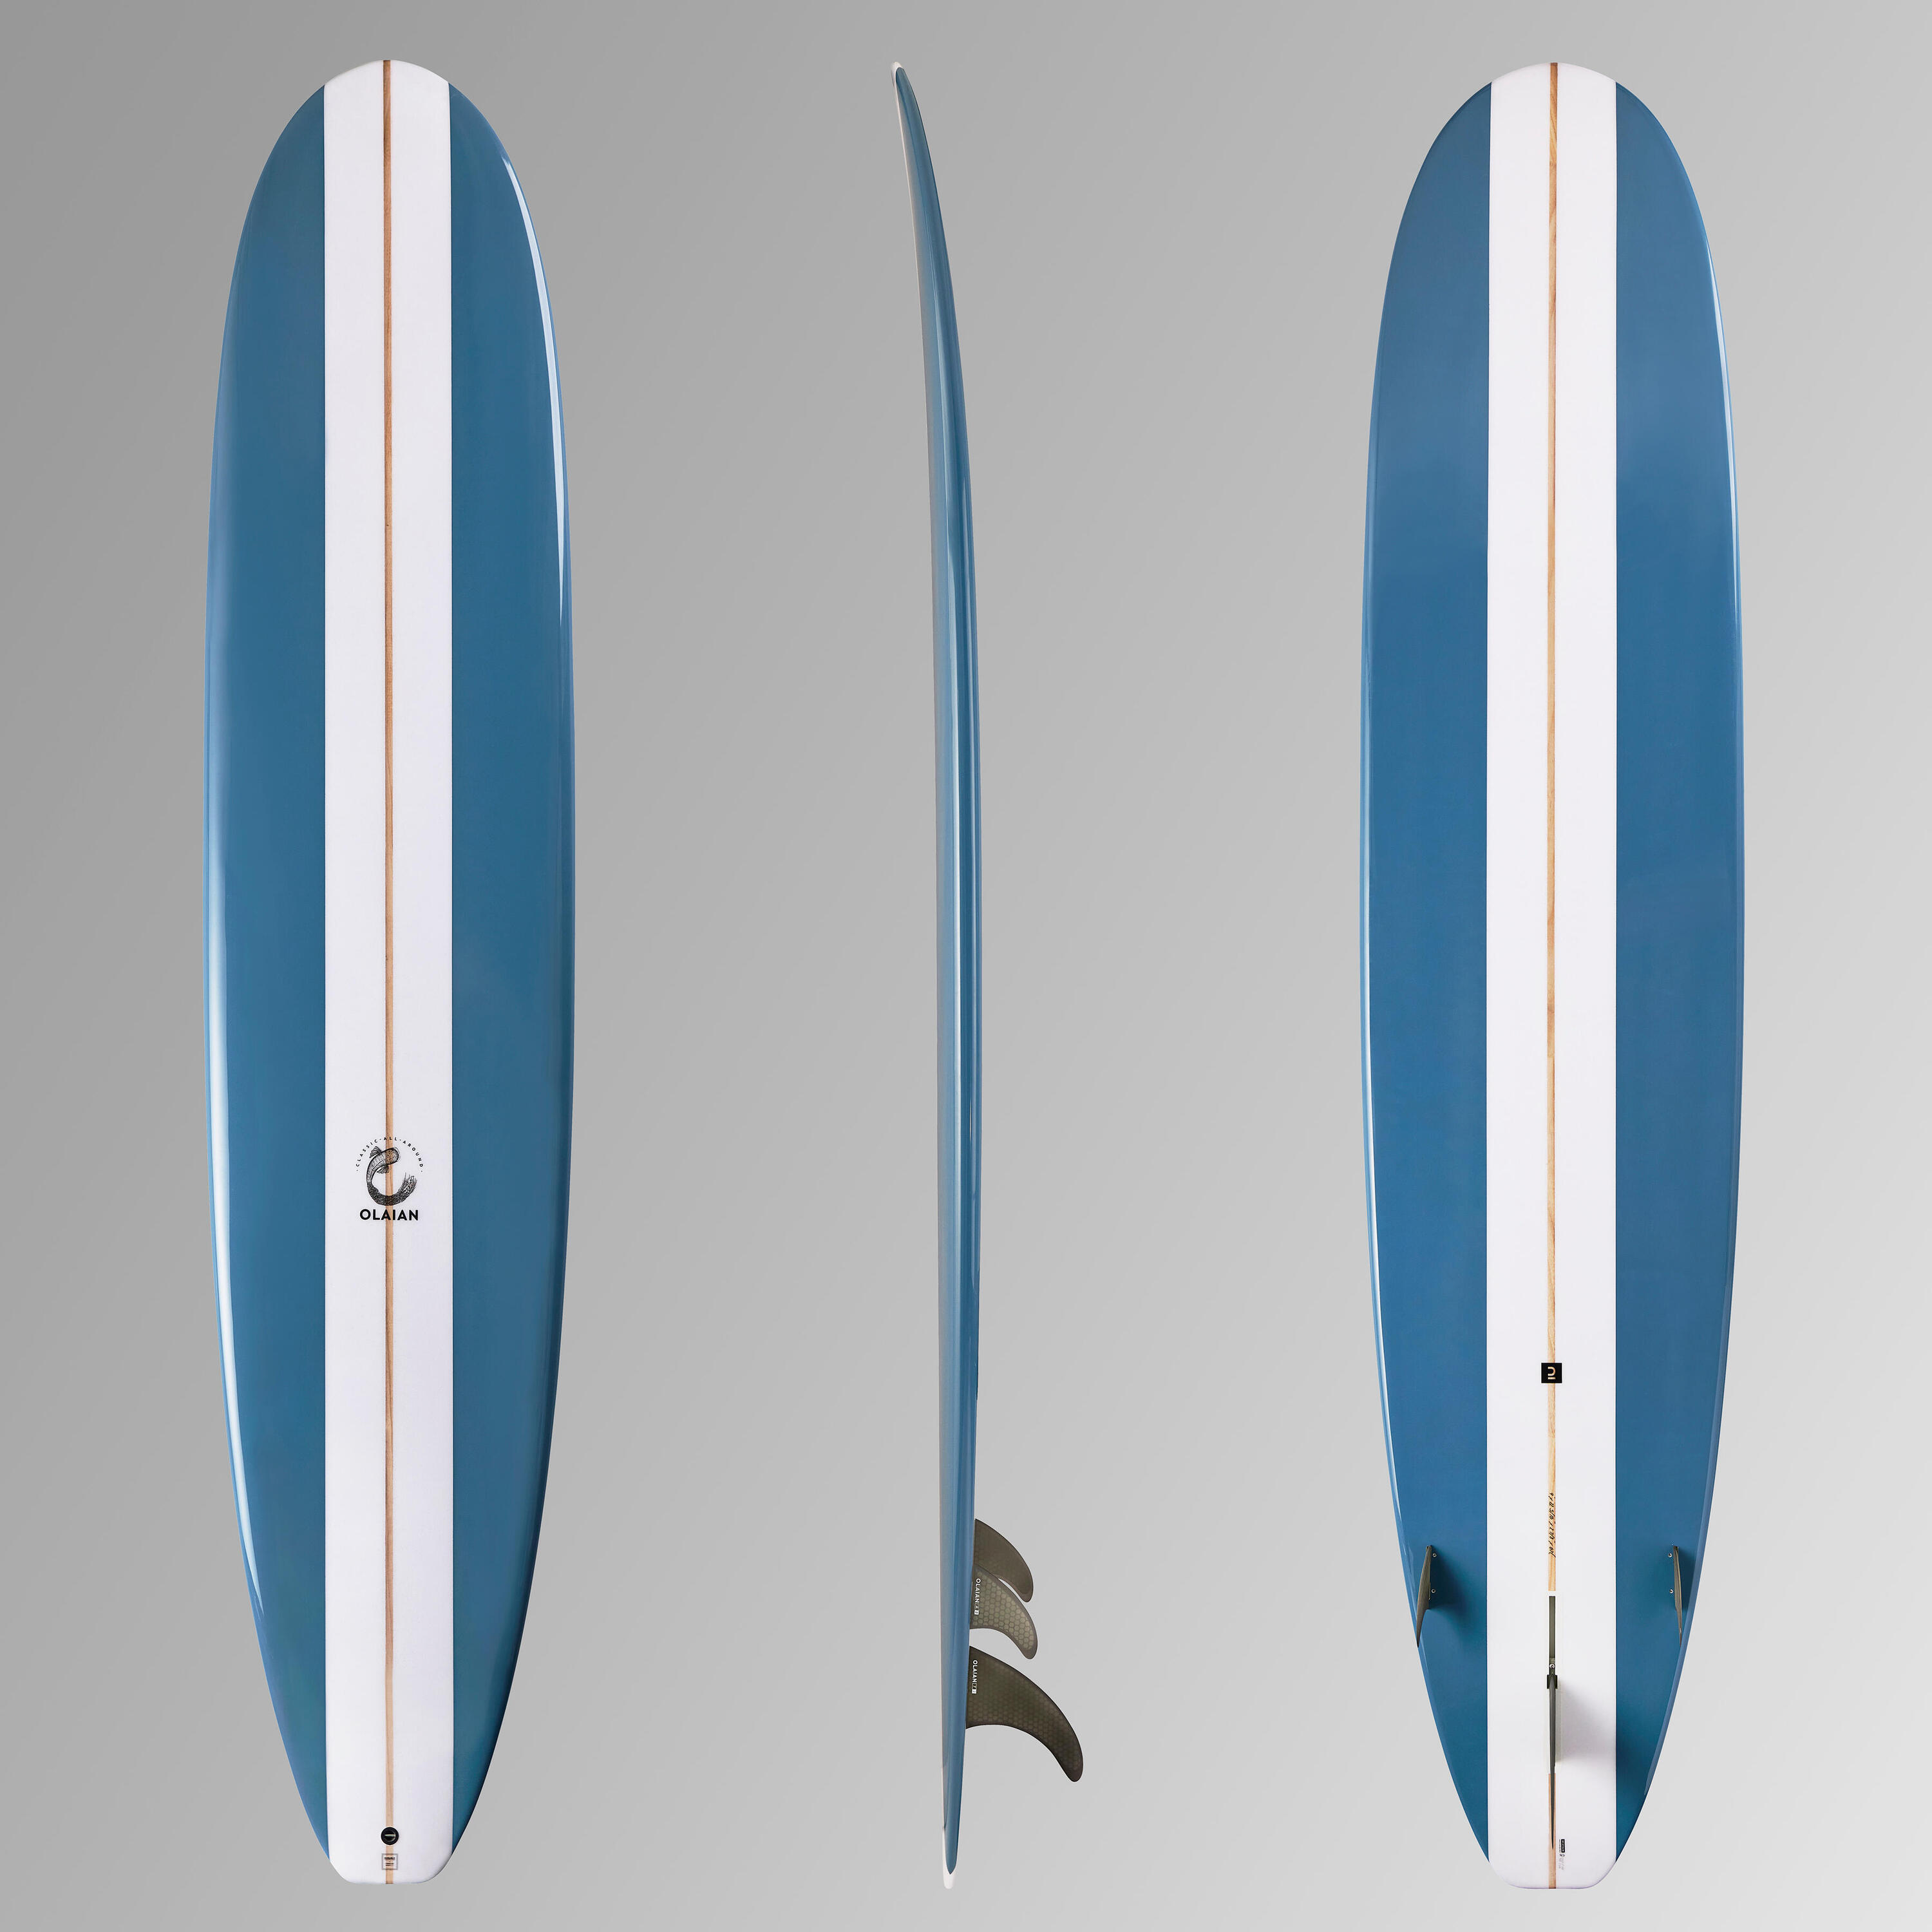 LONGBOARD 900 9' 67 L . Comes with 2+1 set-up 8" central fin. 1/14